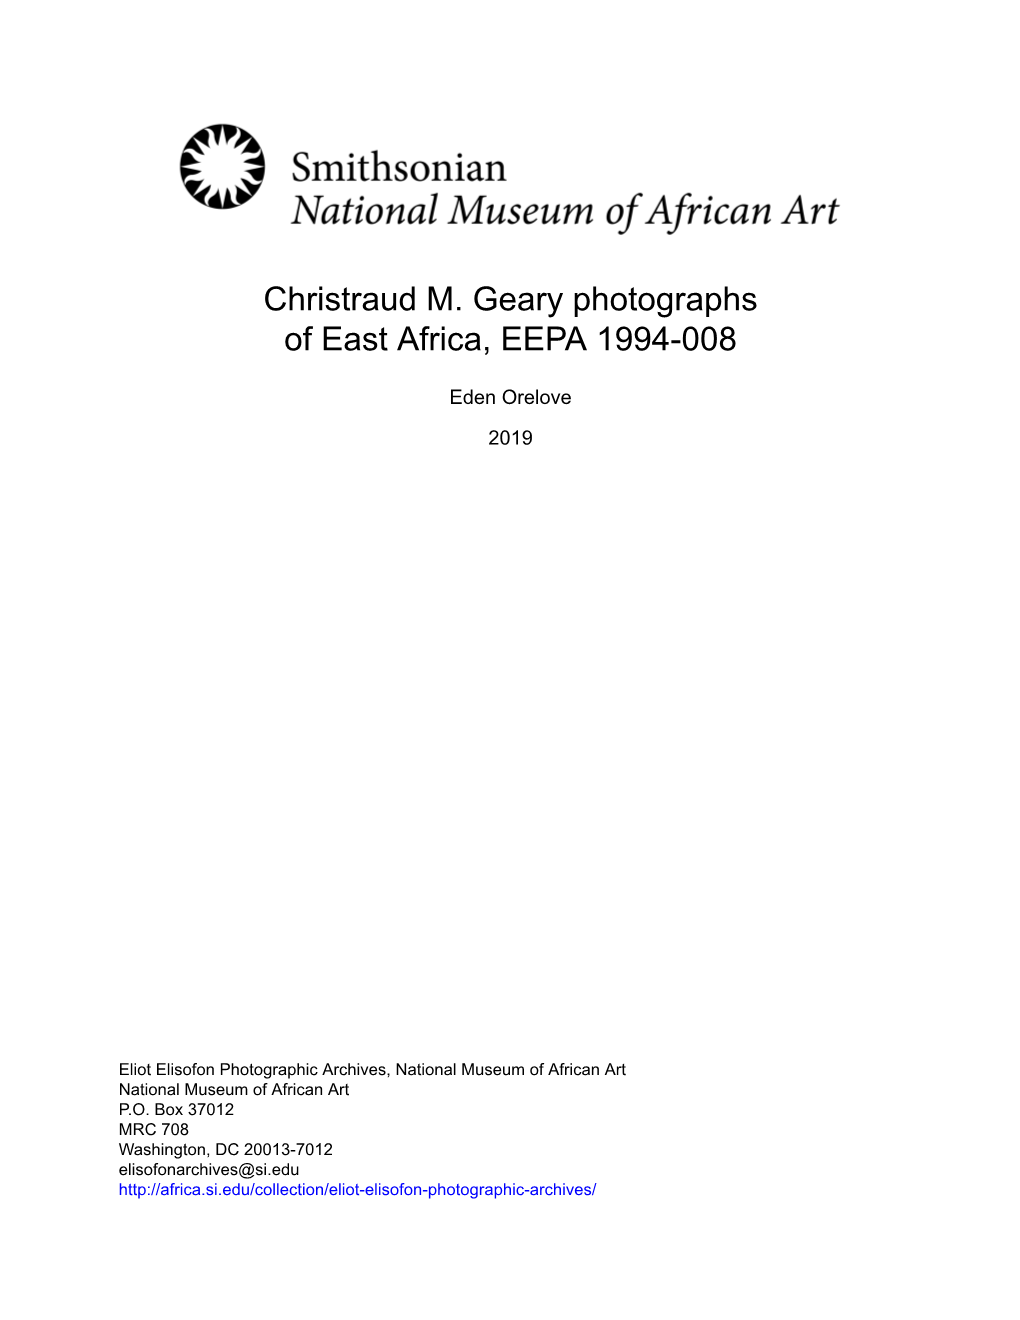 Christraud M. Geary Photographs of East Africa, EEPA 1994-008